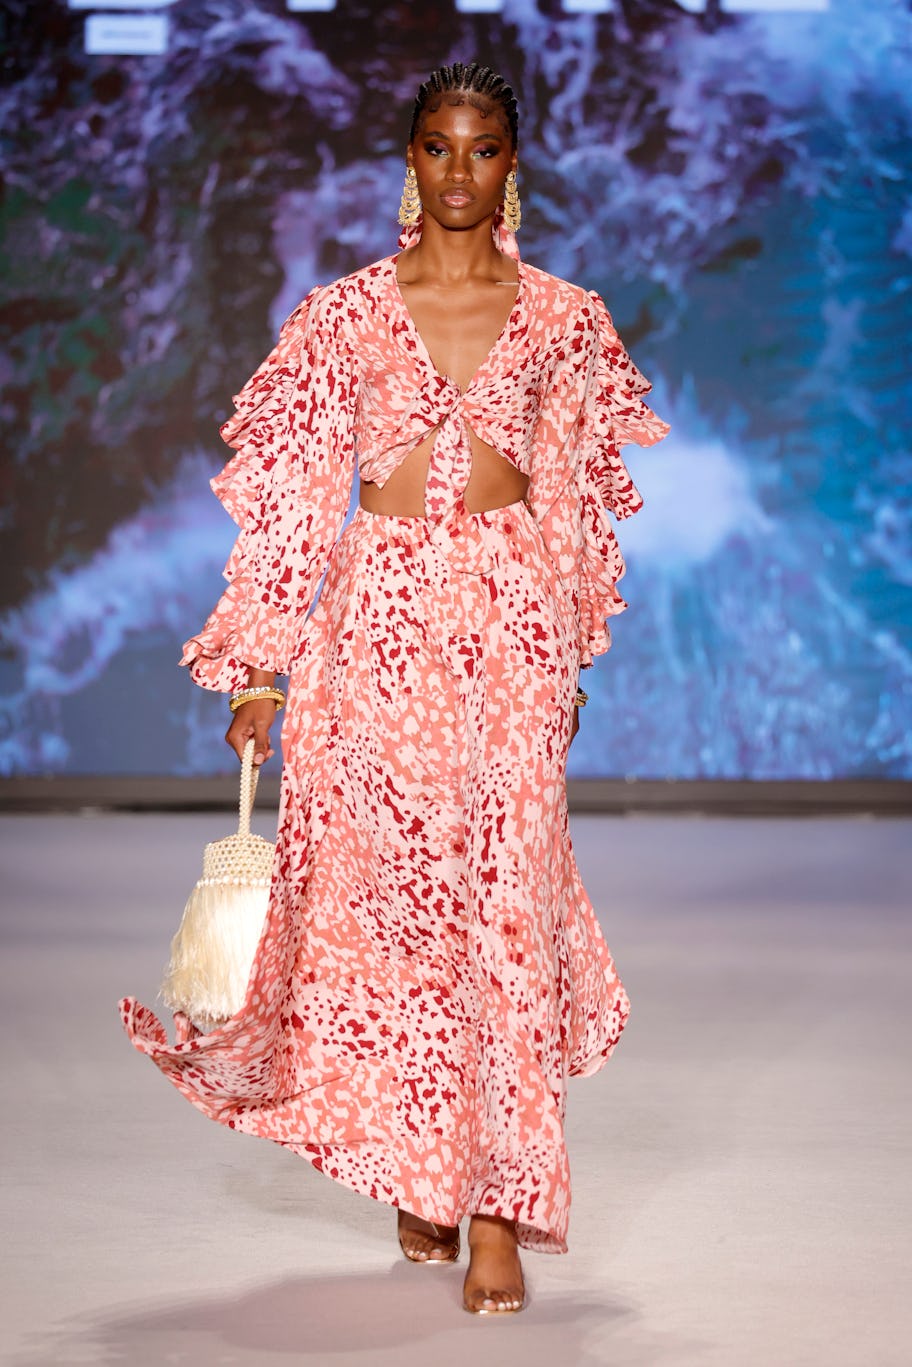 7 Emerging Designers To Know From Paraiso's 2022 Miami Swim Week